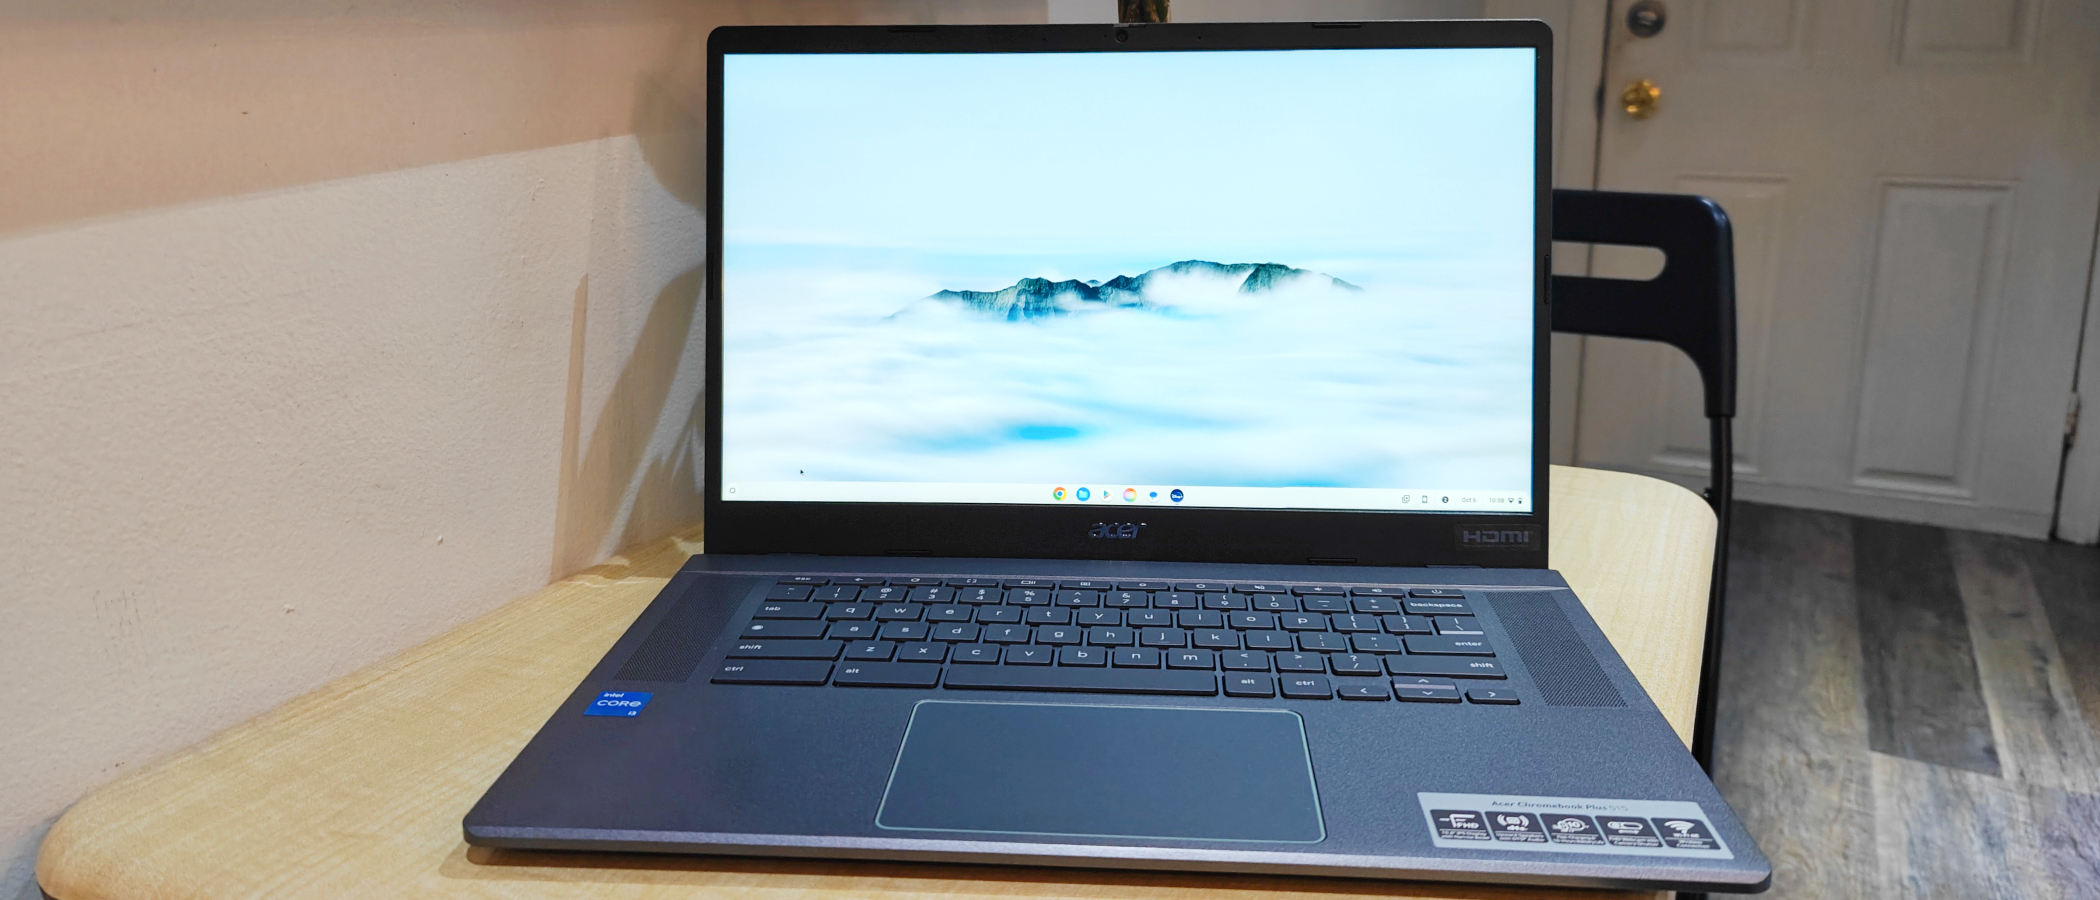 You can try the new Chromebook Plus features without buying new